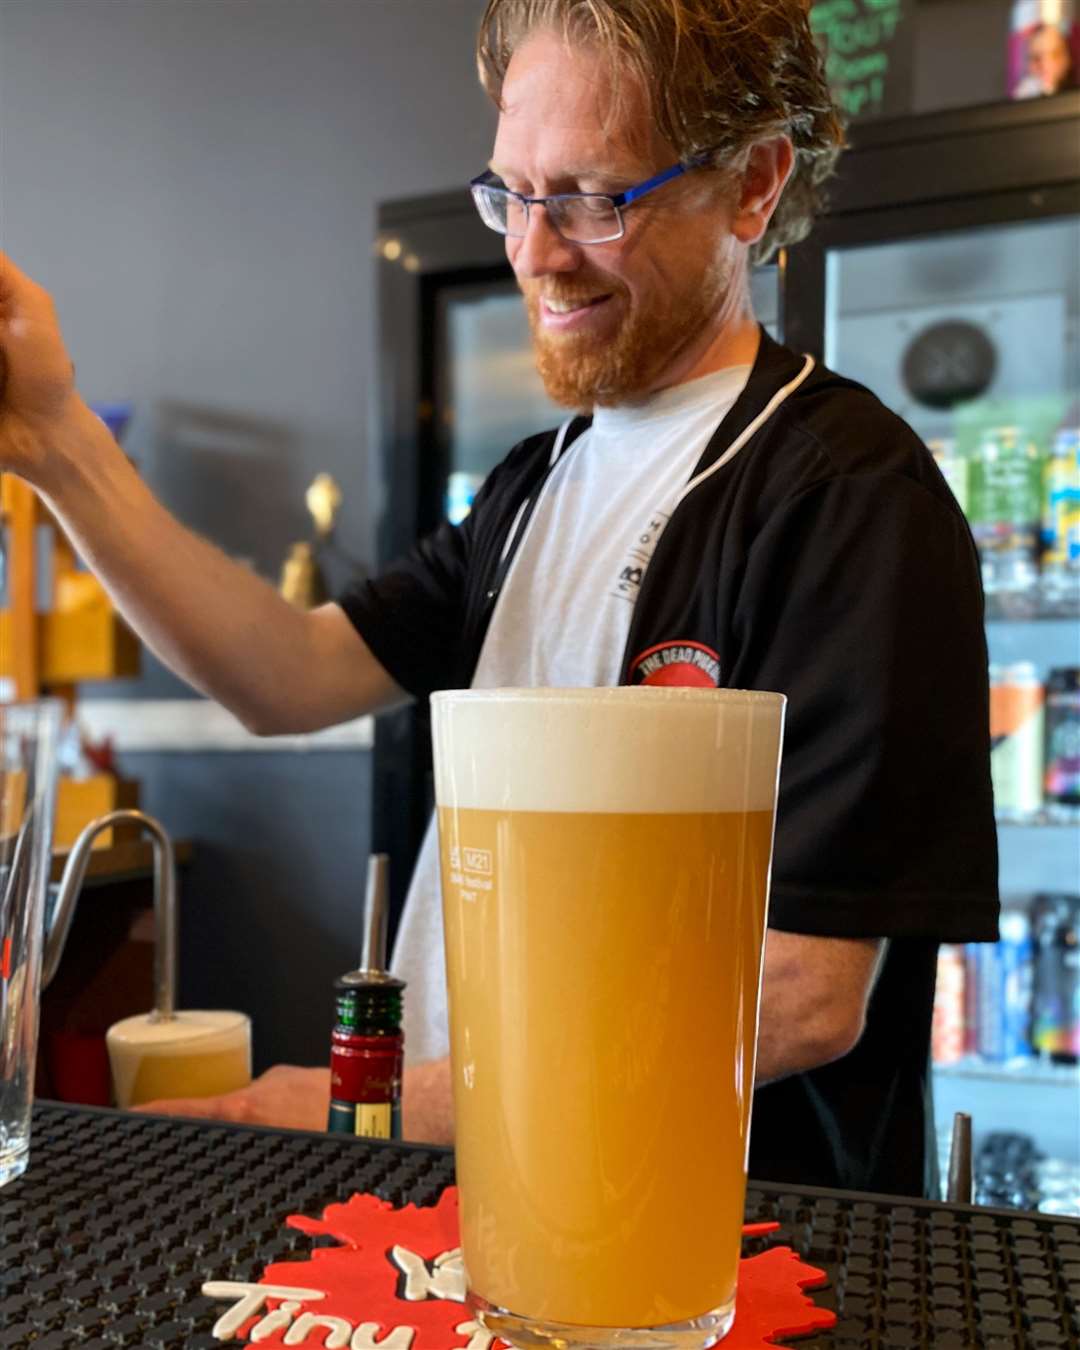 Head brewer Calvin Gear pours a refreshing looking pint